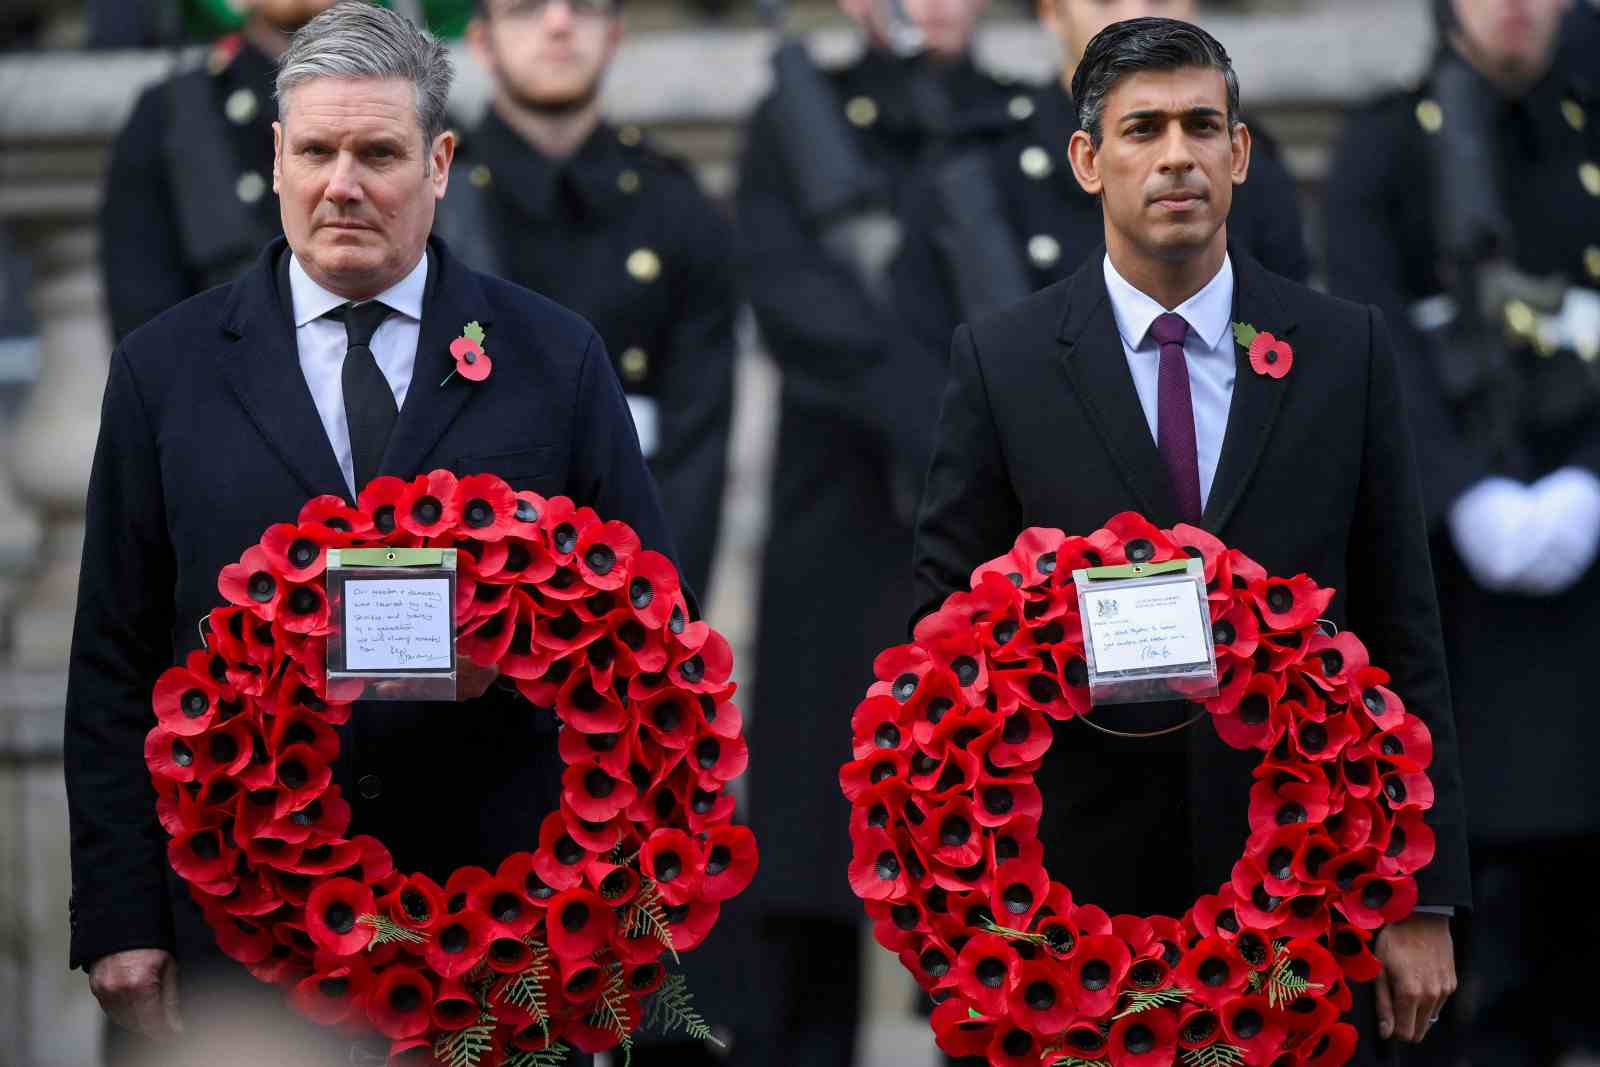 abour Party leader Keir Starmer and Prime Minister Rishi Sunak attend the Remembrance Sunday ceremony at the Cenotaph on Whitehall on November 13, 2022 in London, England (Toby Melville - WPA Pool/Getty Images)